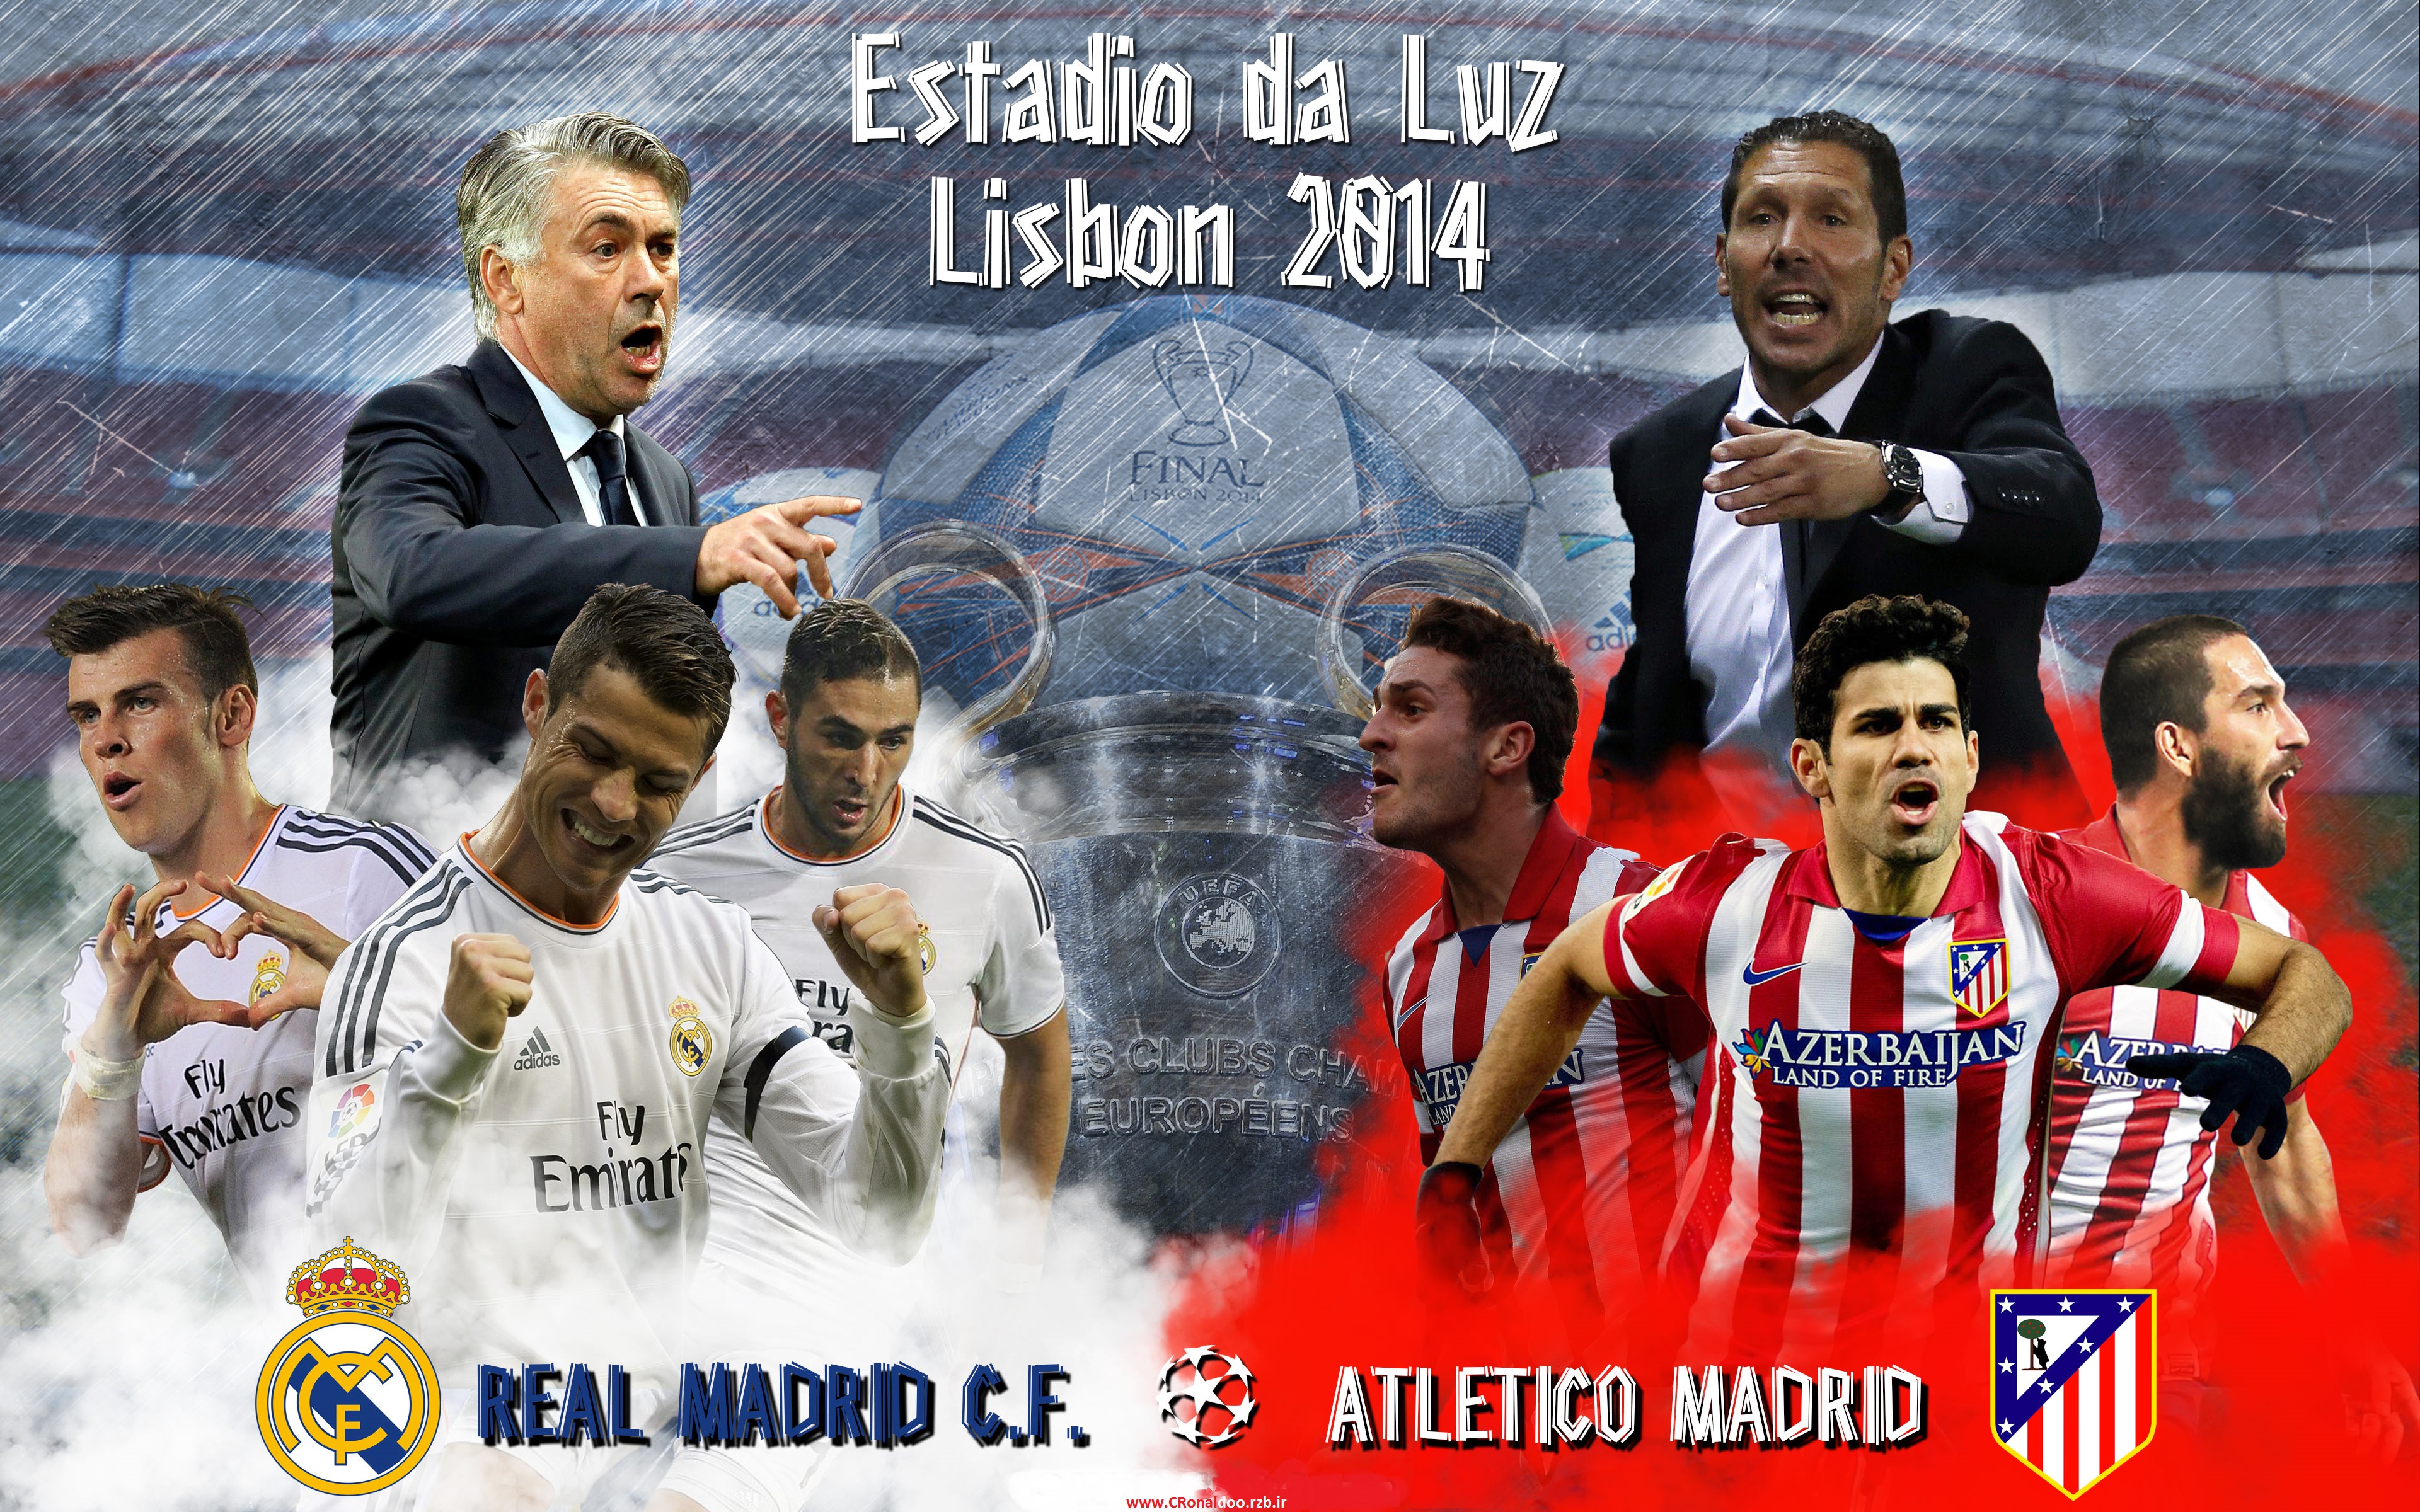 https://rozup.ir/up/cronaldoo/Pictures/Real-Madrid-Vs-Atletico-Madrid-Champions-League-Final-Lisbon-2014.jpg